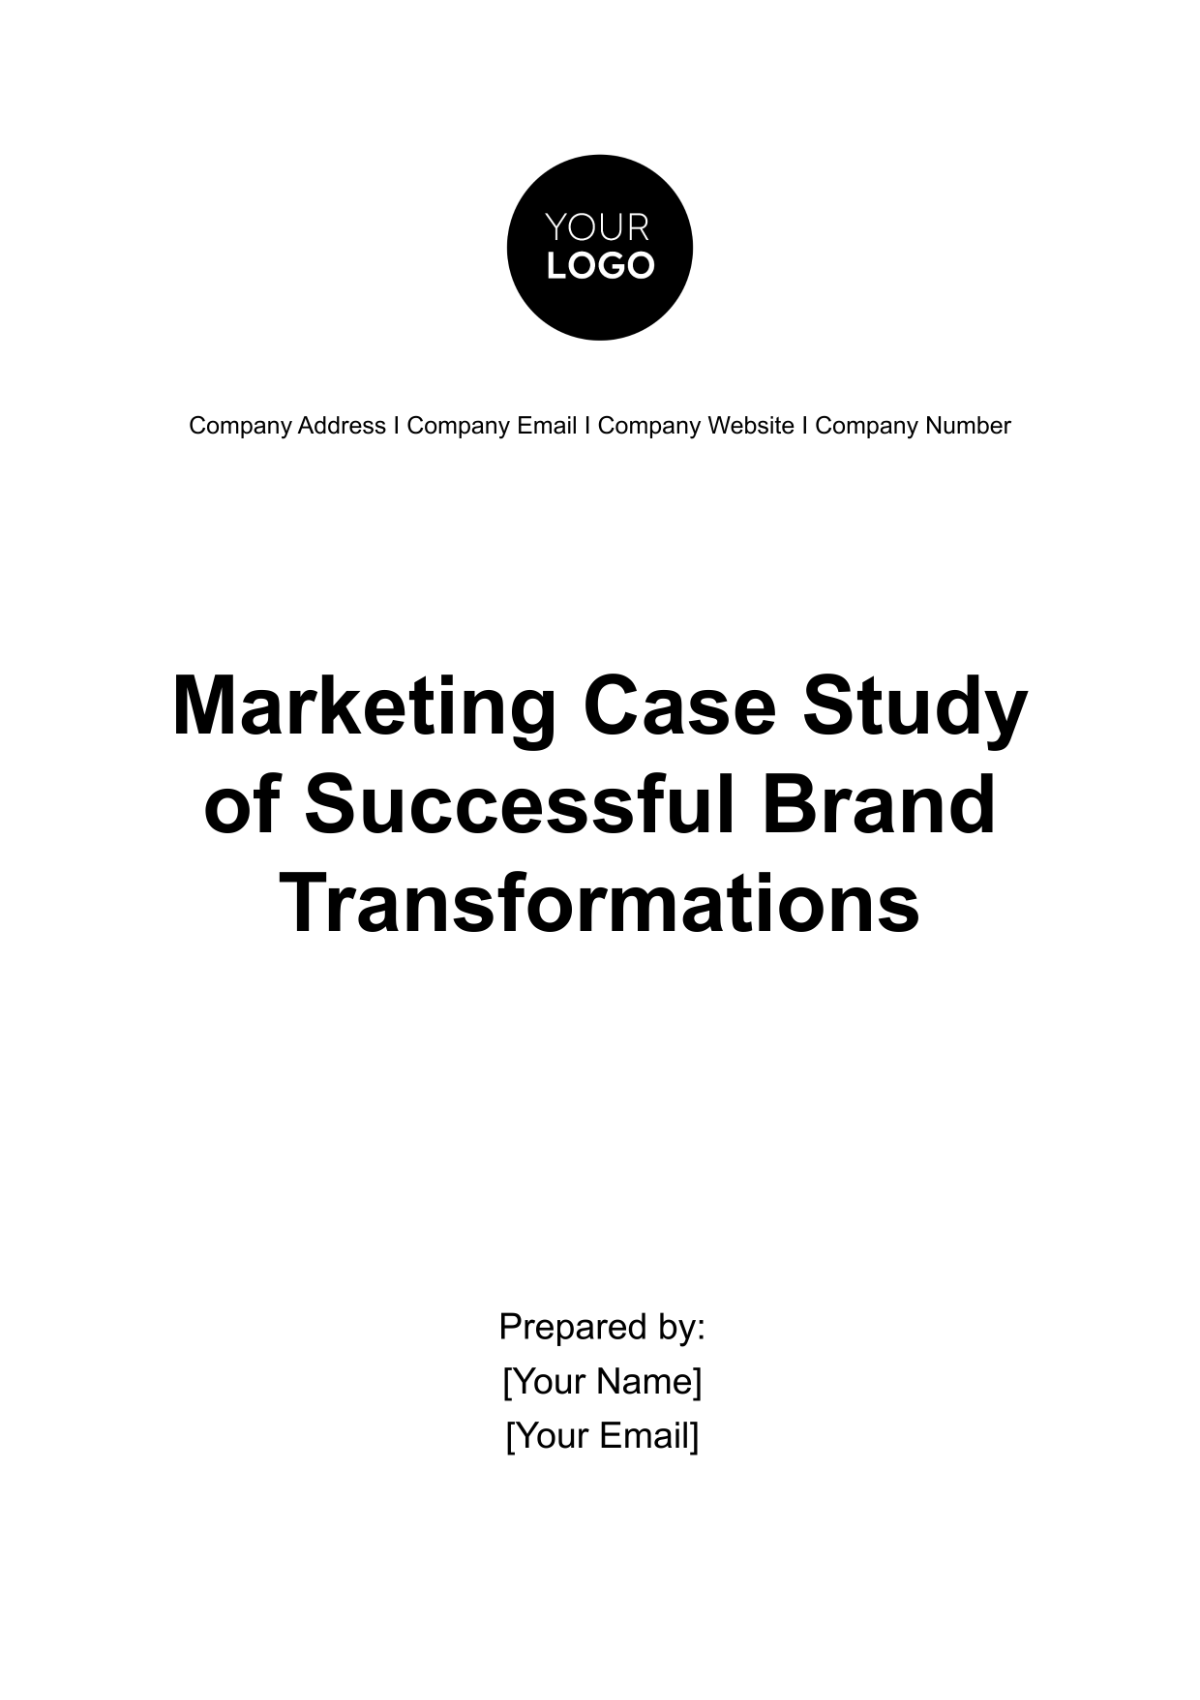 Free Marketing Case Study of Successful Brand Transformations Template